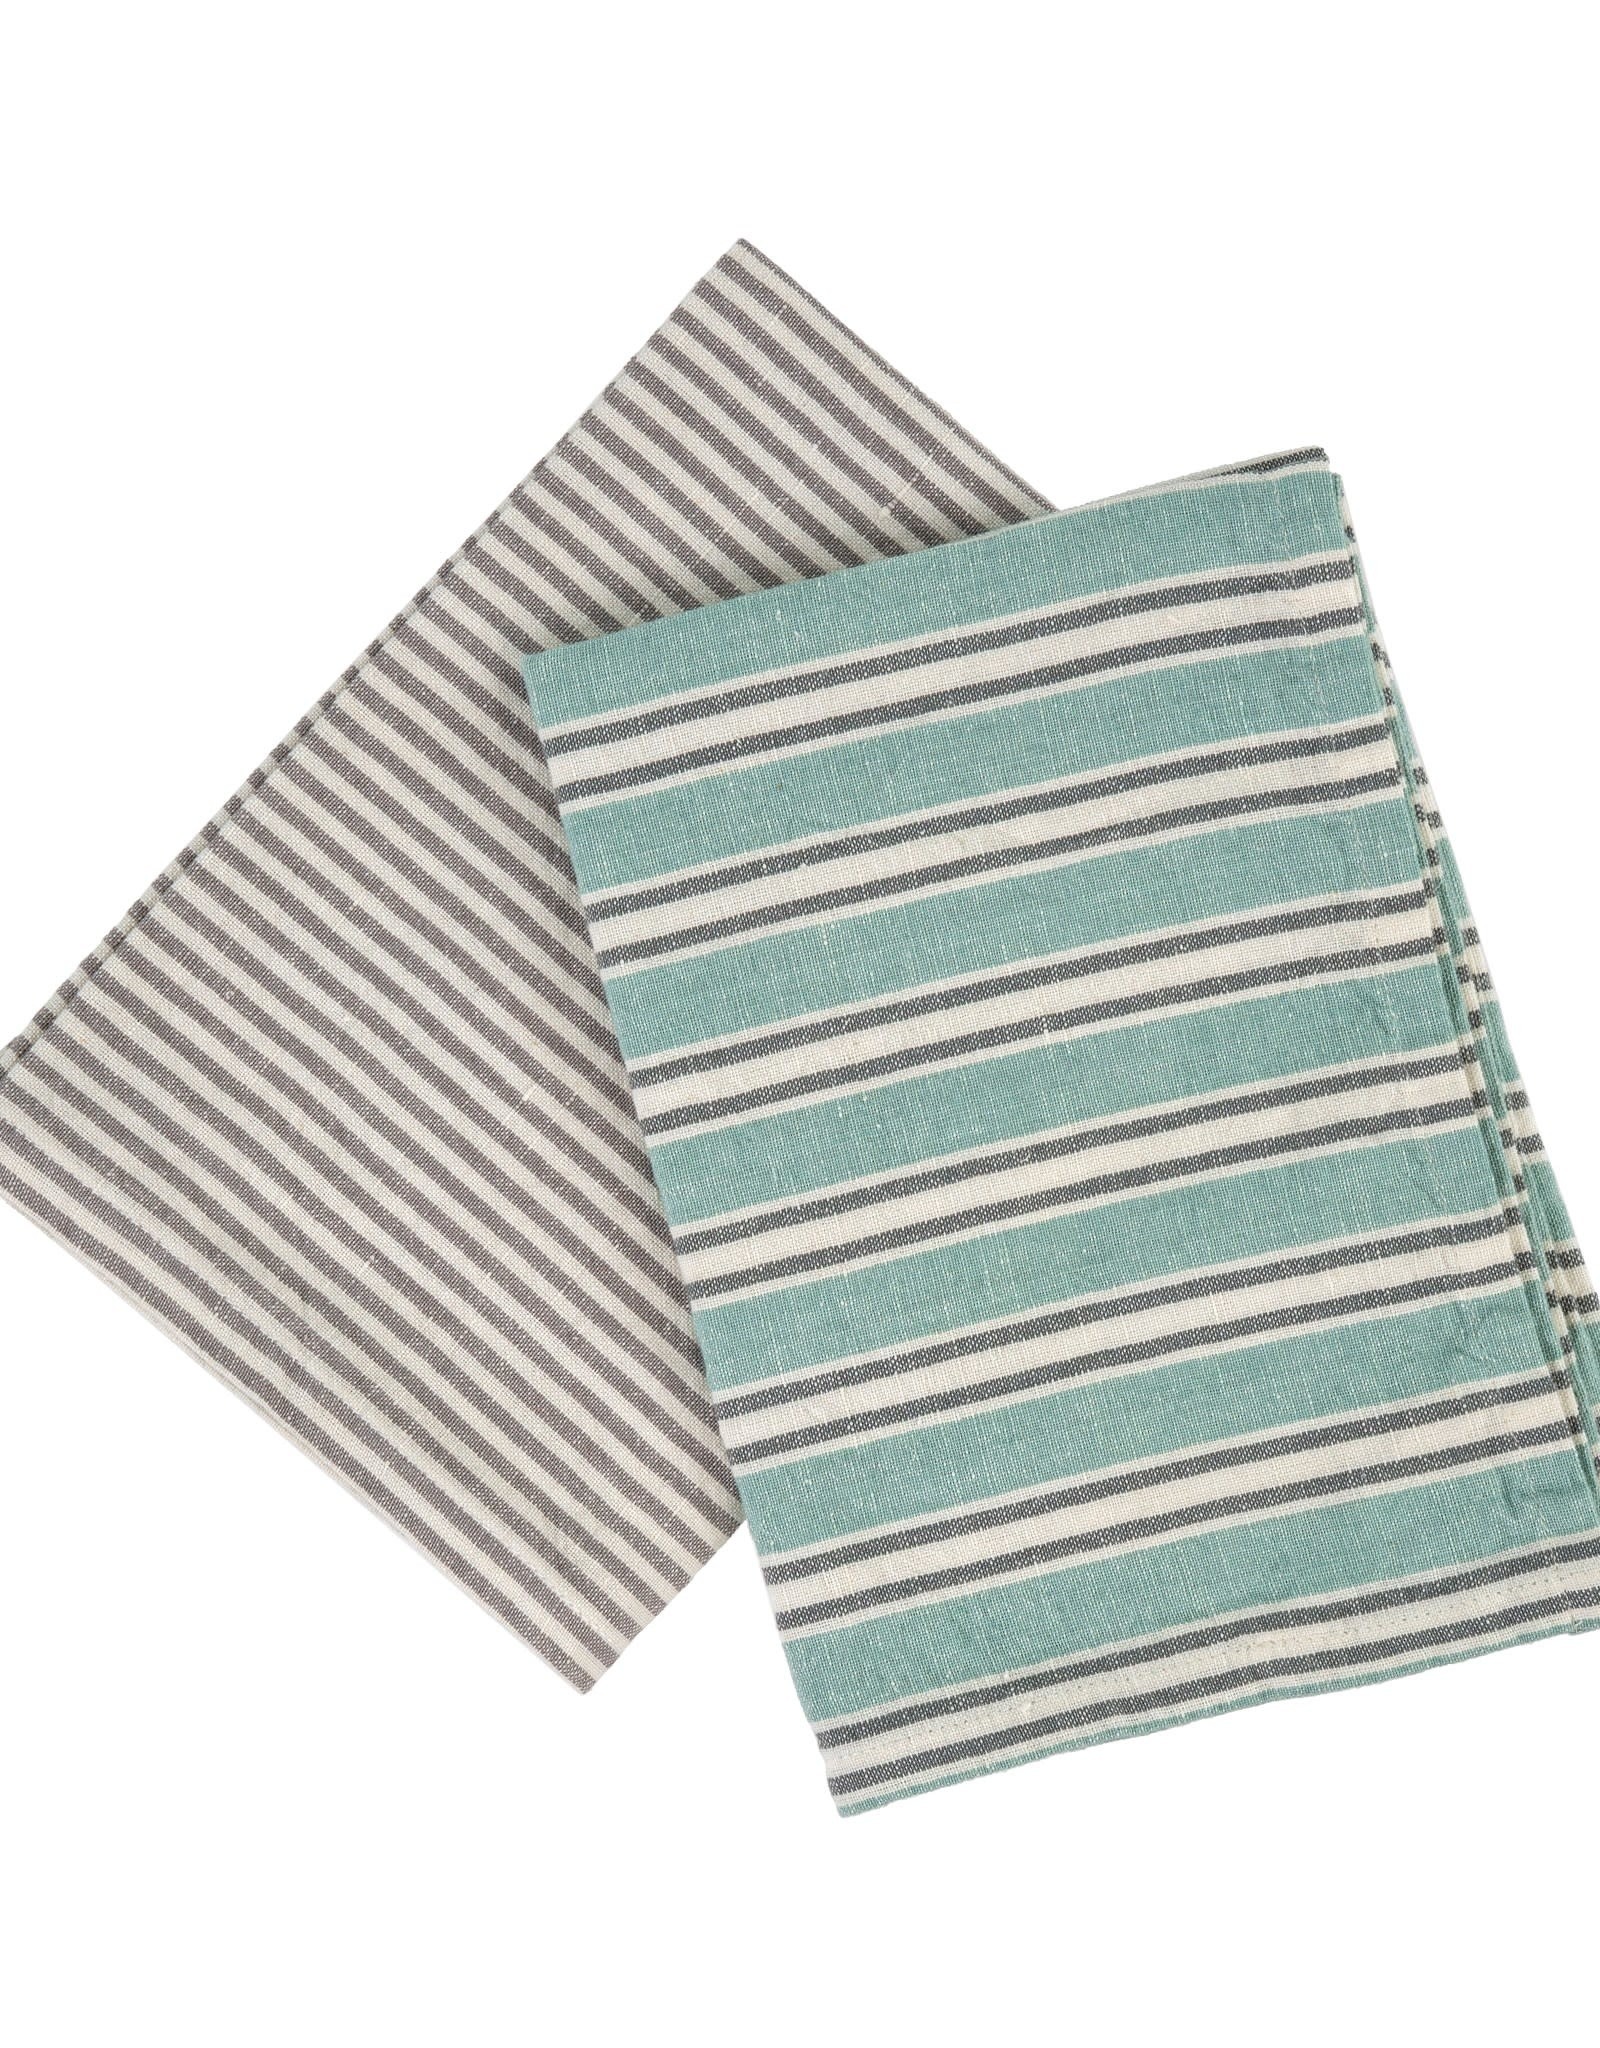 French Linen Tea Towels S/2 Turquoise